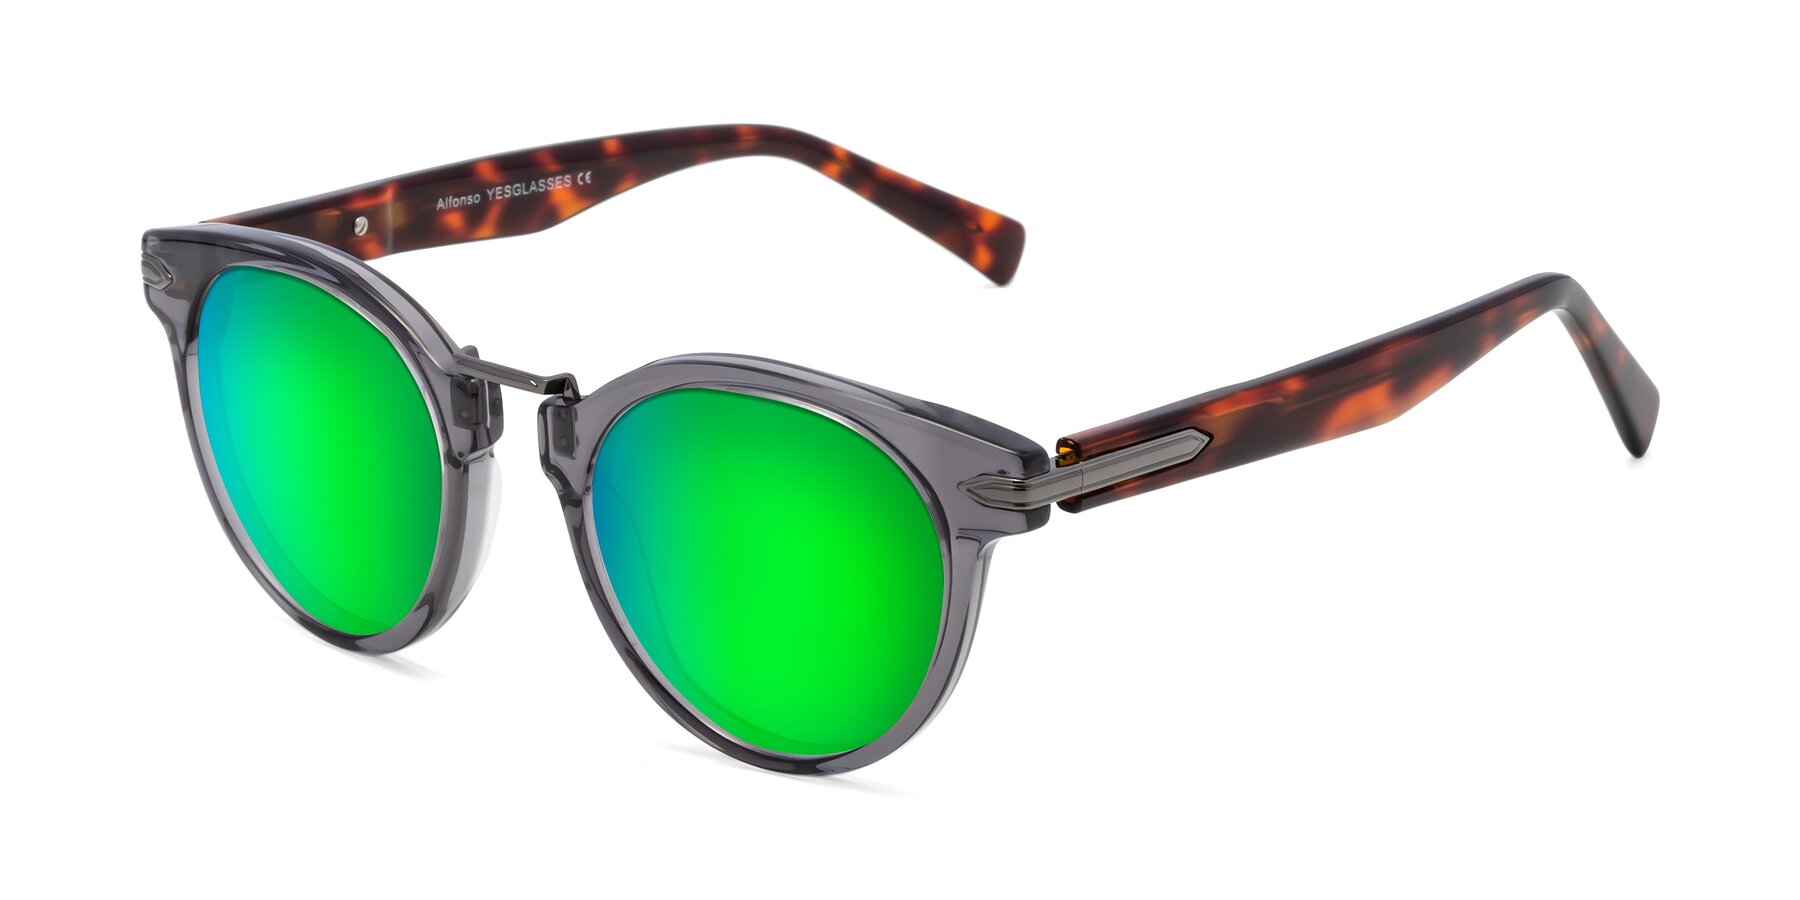 Angle of Alfonso in Gray /Tortoise with Green Mirrored Lenses